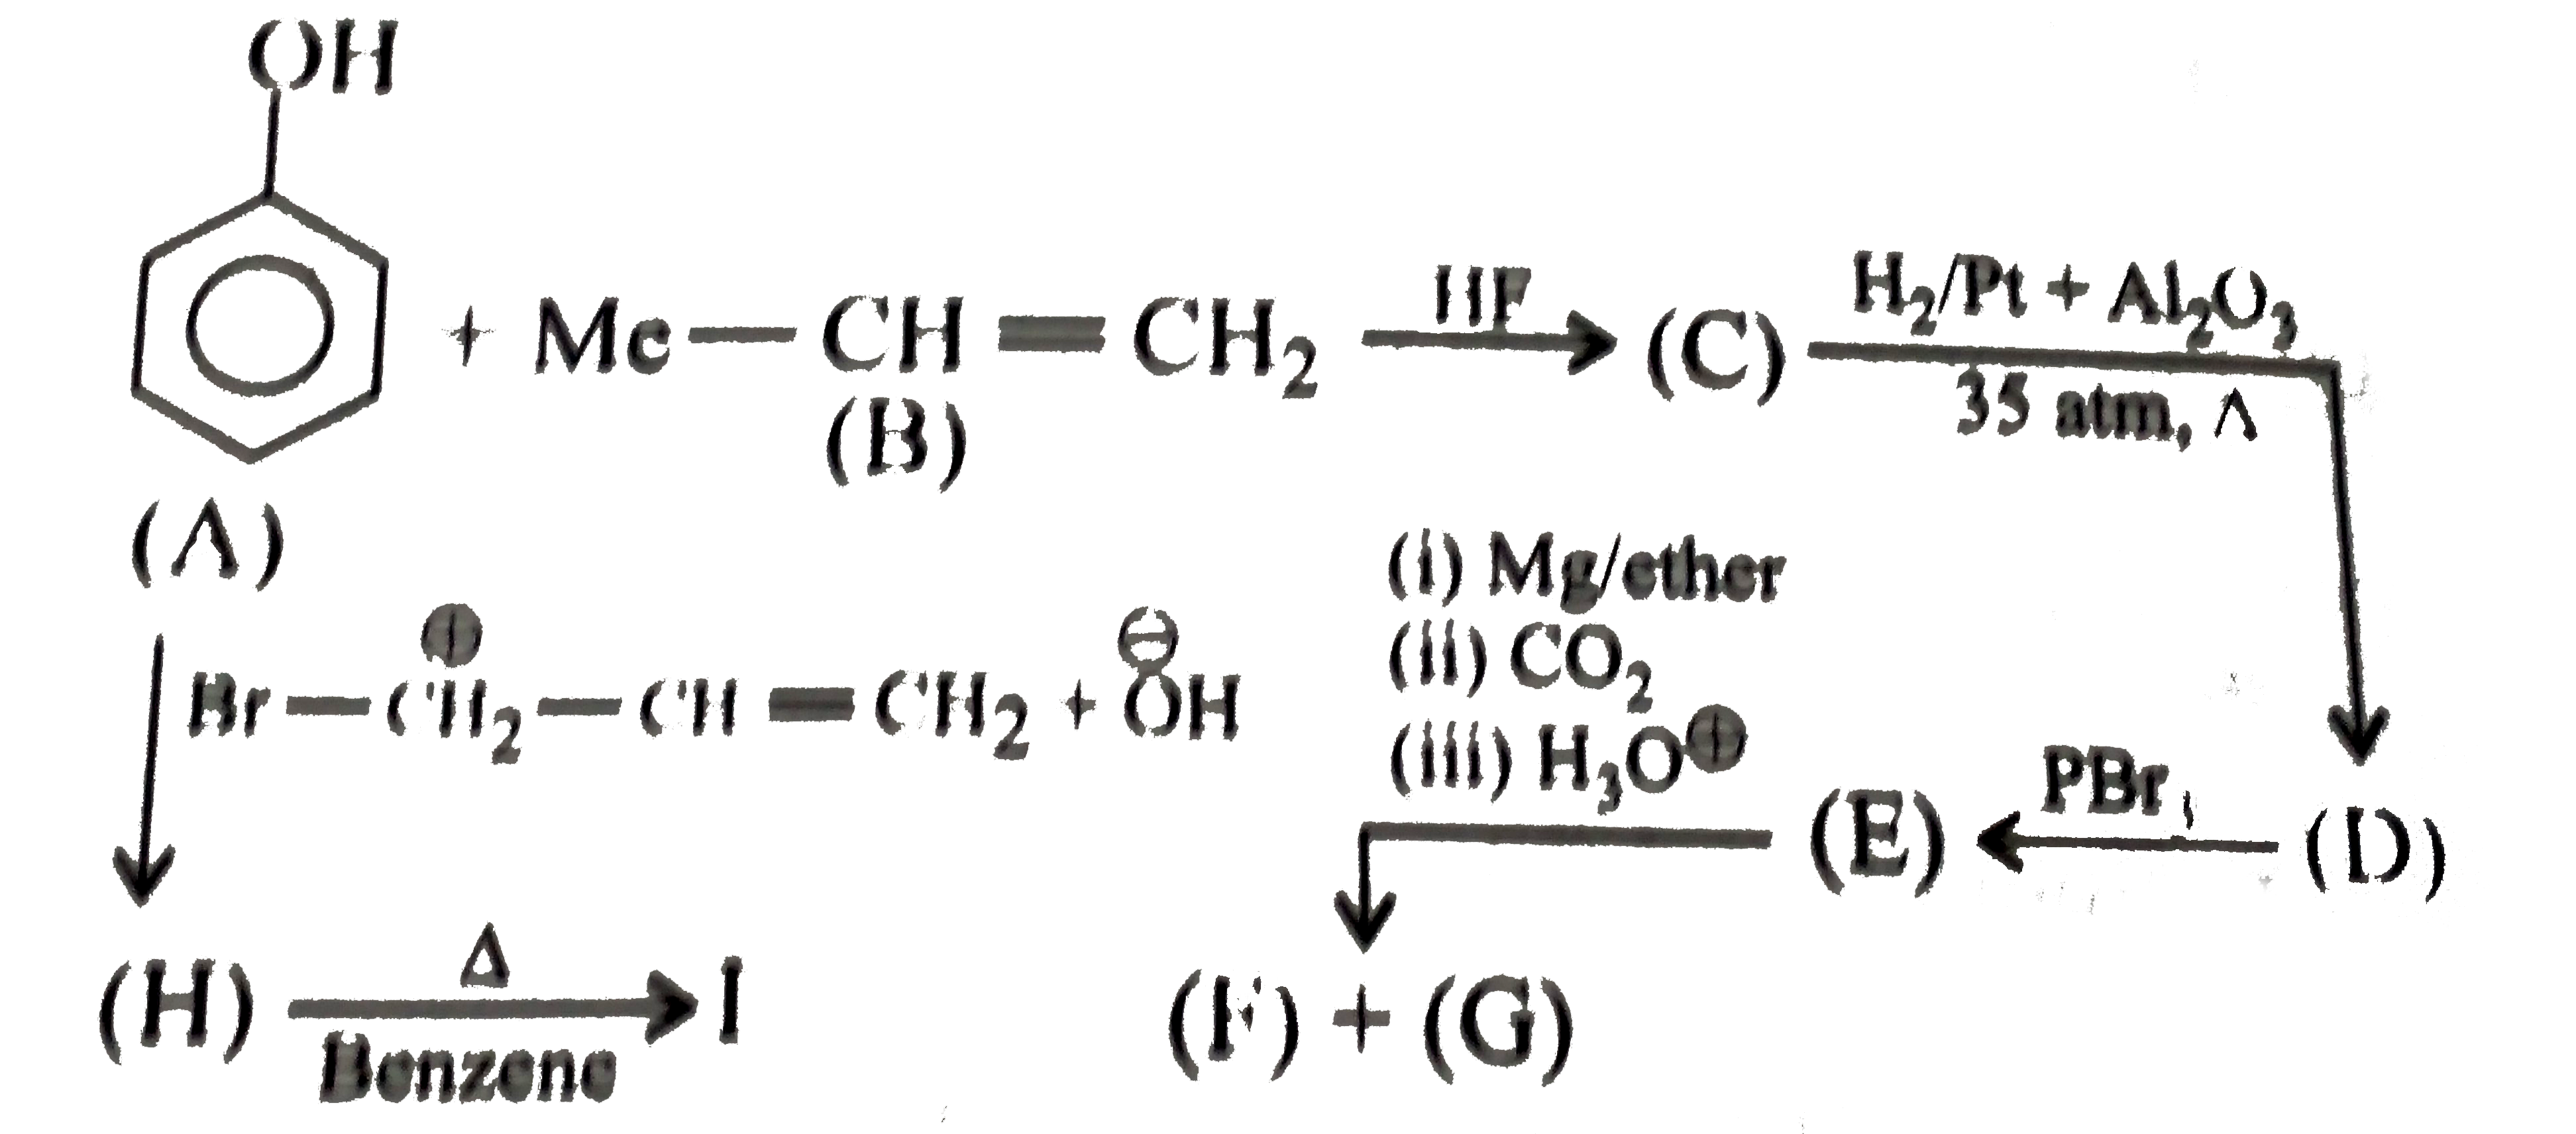 The names of reaction and intermediate species involved in the formation of (C ), respectively, are: